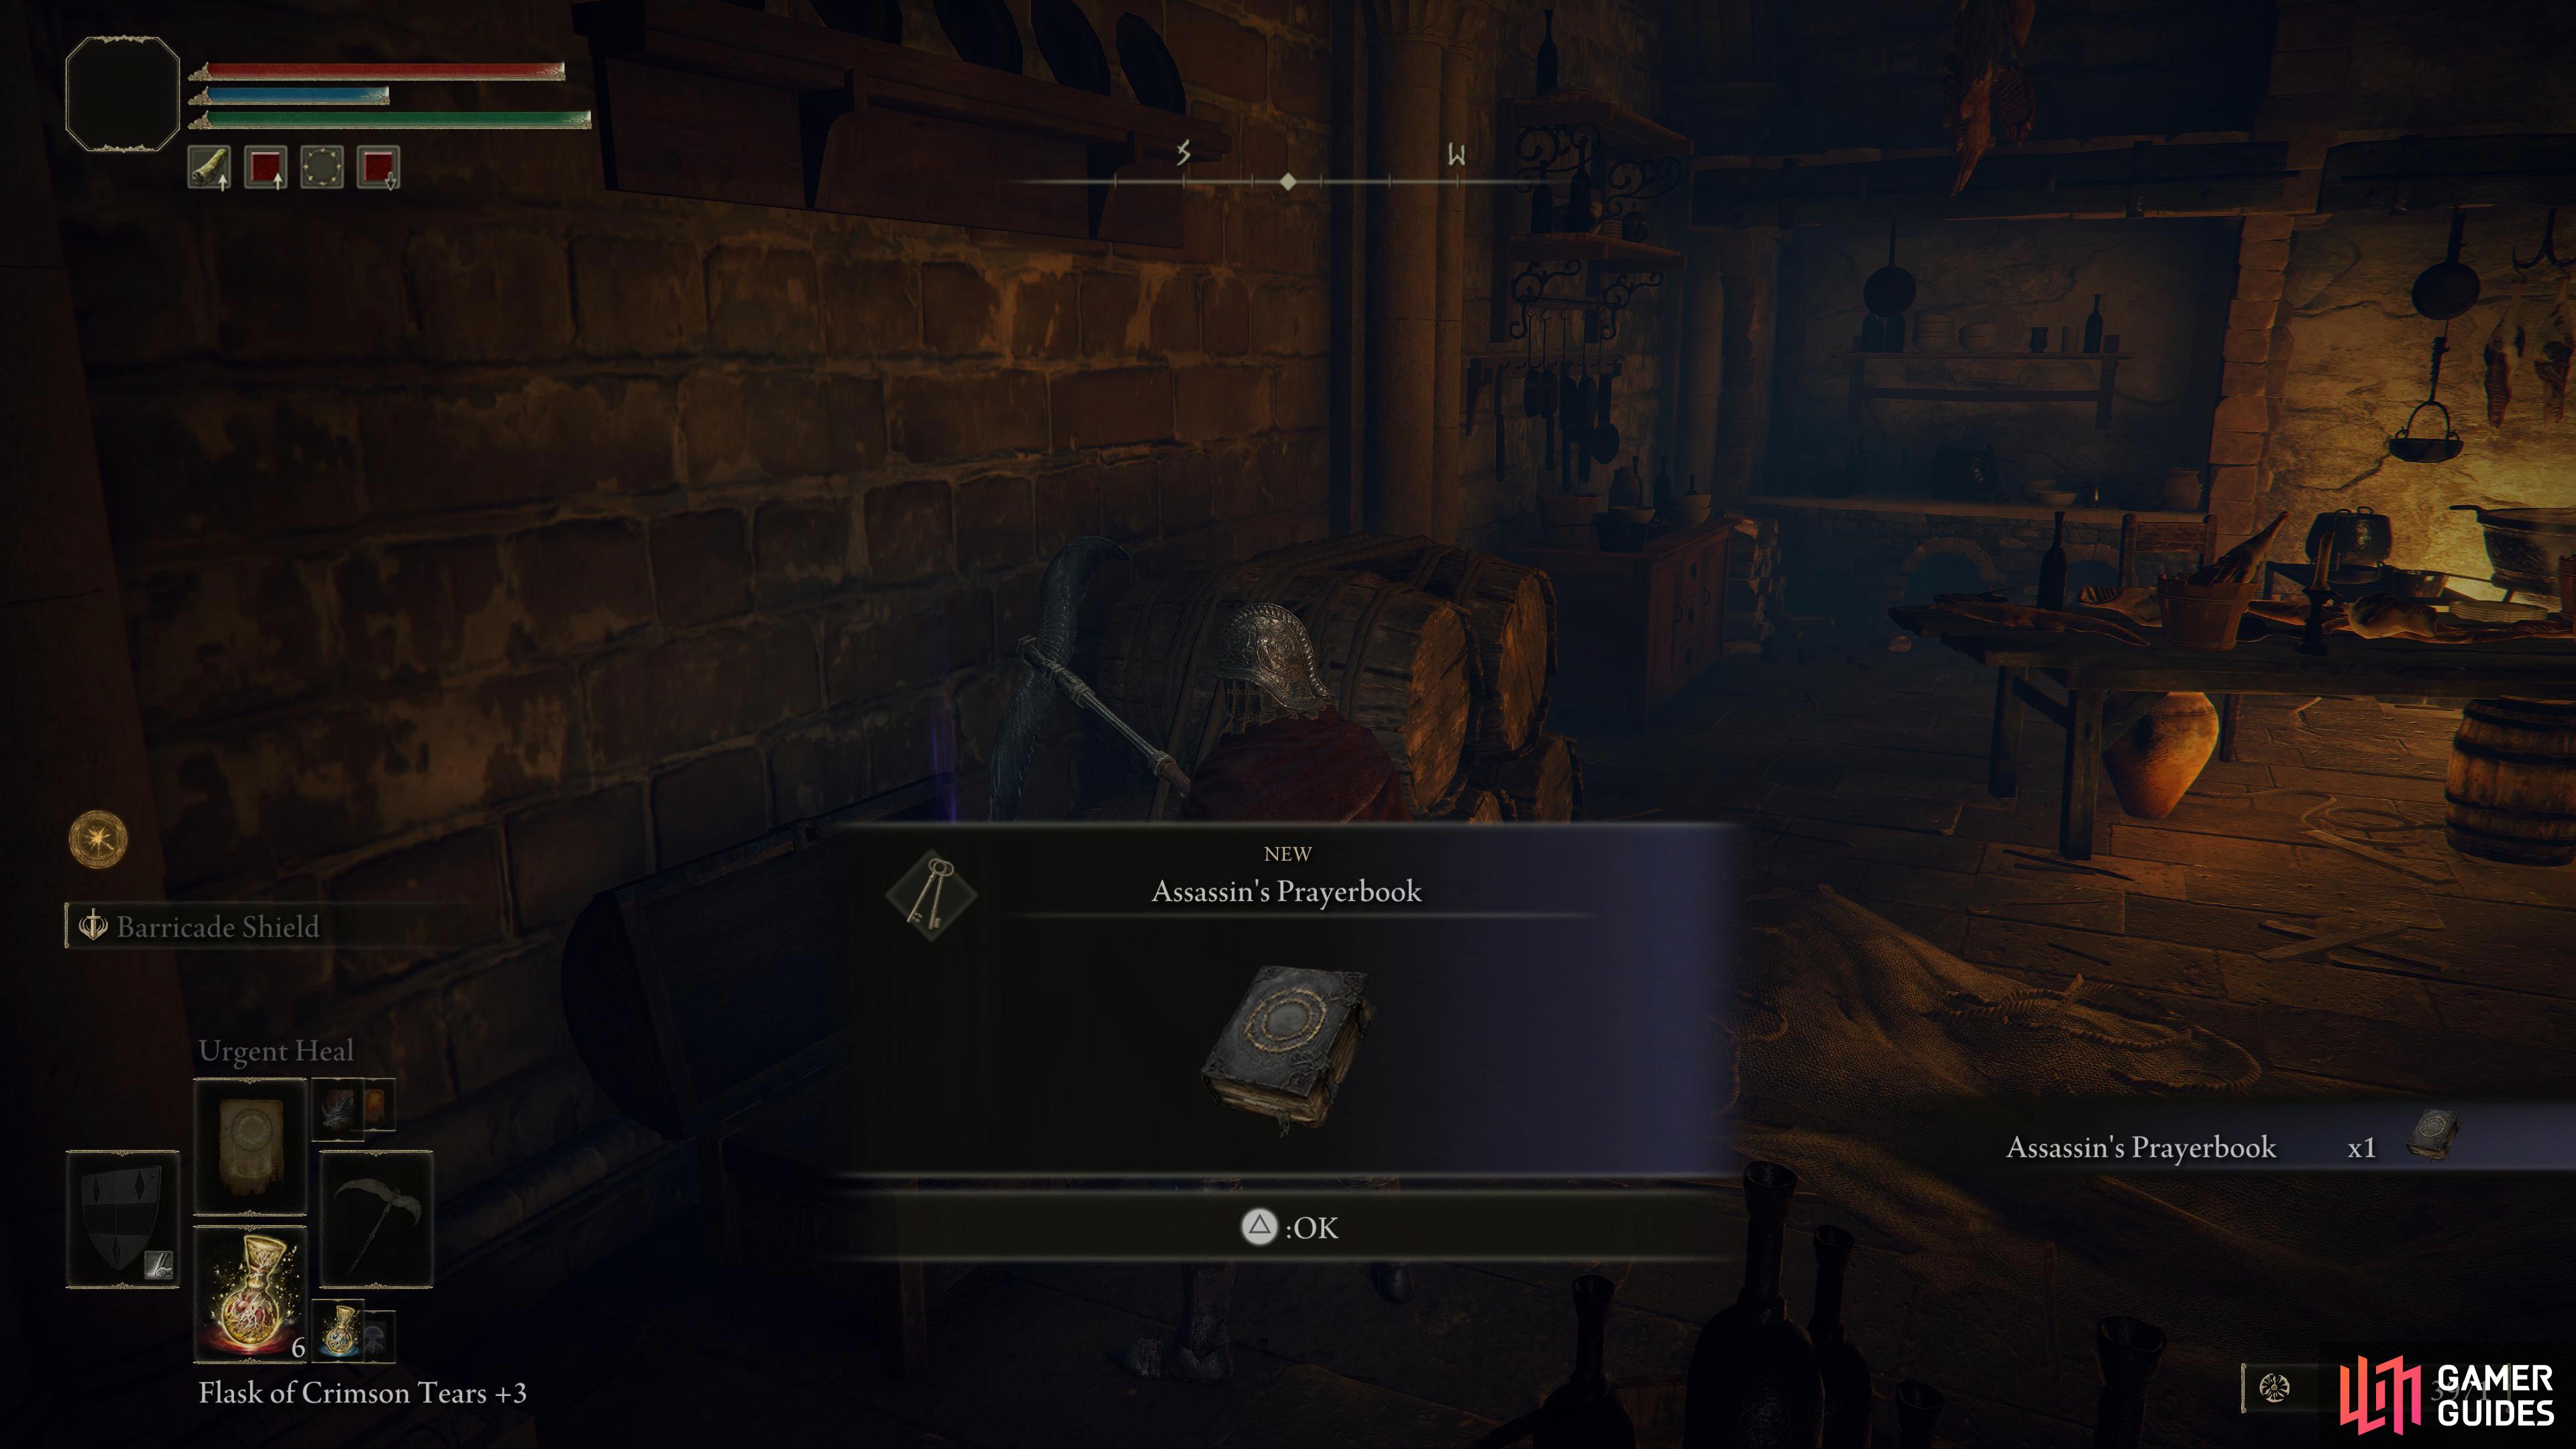 You can hand the Assassin's Prayerbook found in the Hold to Corhyn for more Incantations.